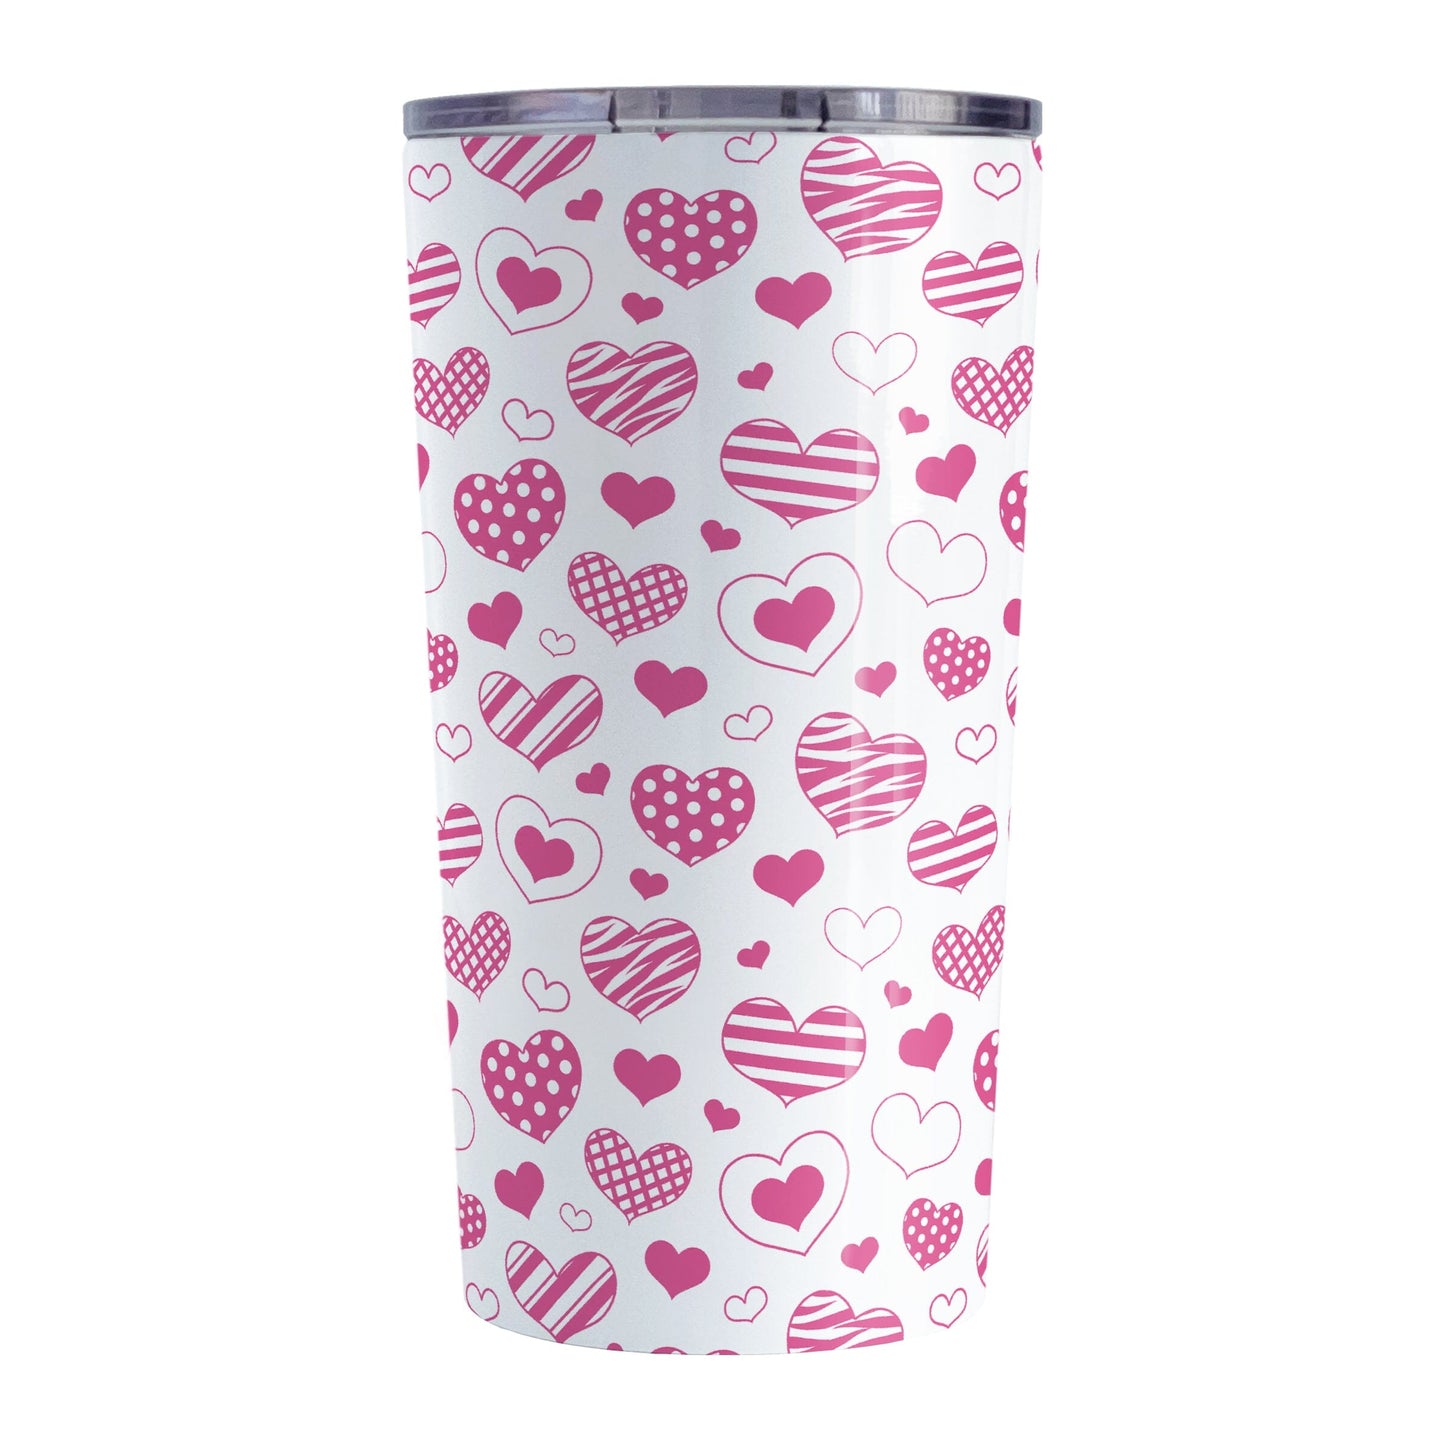 Pink Heart Doodles Tumbler Cup (20oz) at Amy's Coffee Mugs. A stainless steel tumbler cup designed with hand-drawn pink heart doodles in a pattern that wraps around the cup. This cute heart pattern is perfect for Valentine's Day or for anyone who loves hearts and young-at-heart drawings. 